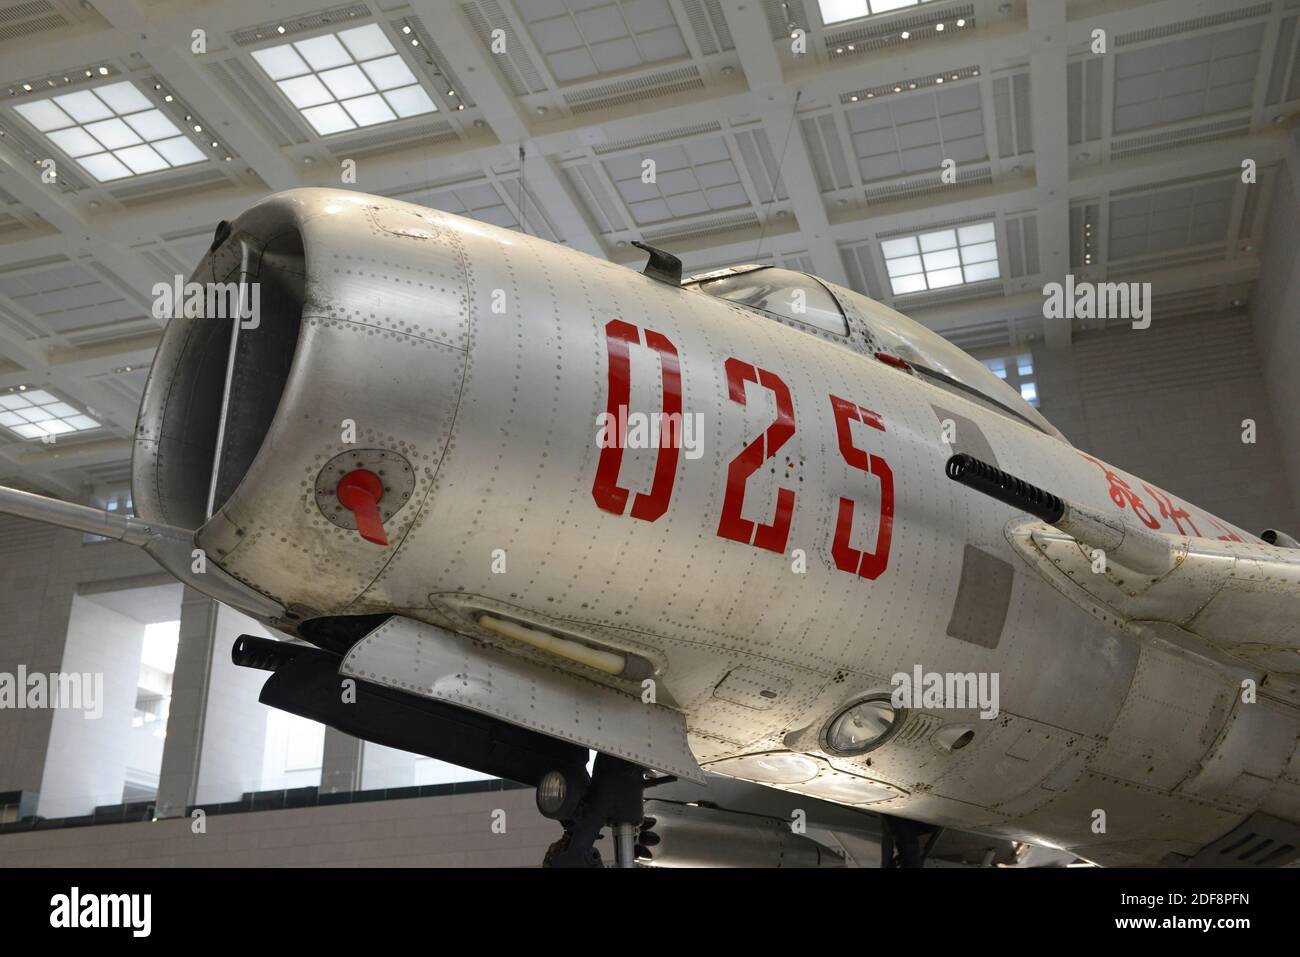 A J-6 fighter from 1964 on display in the main hall at the National Military museum in Beijing, China Stock Photo